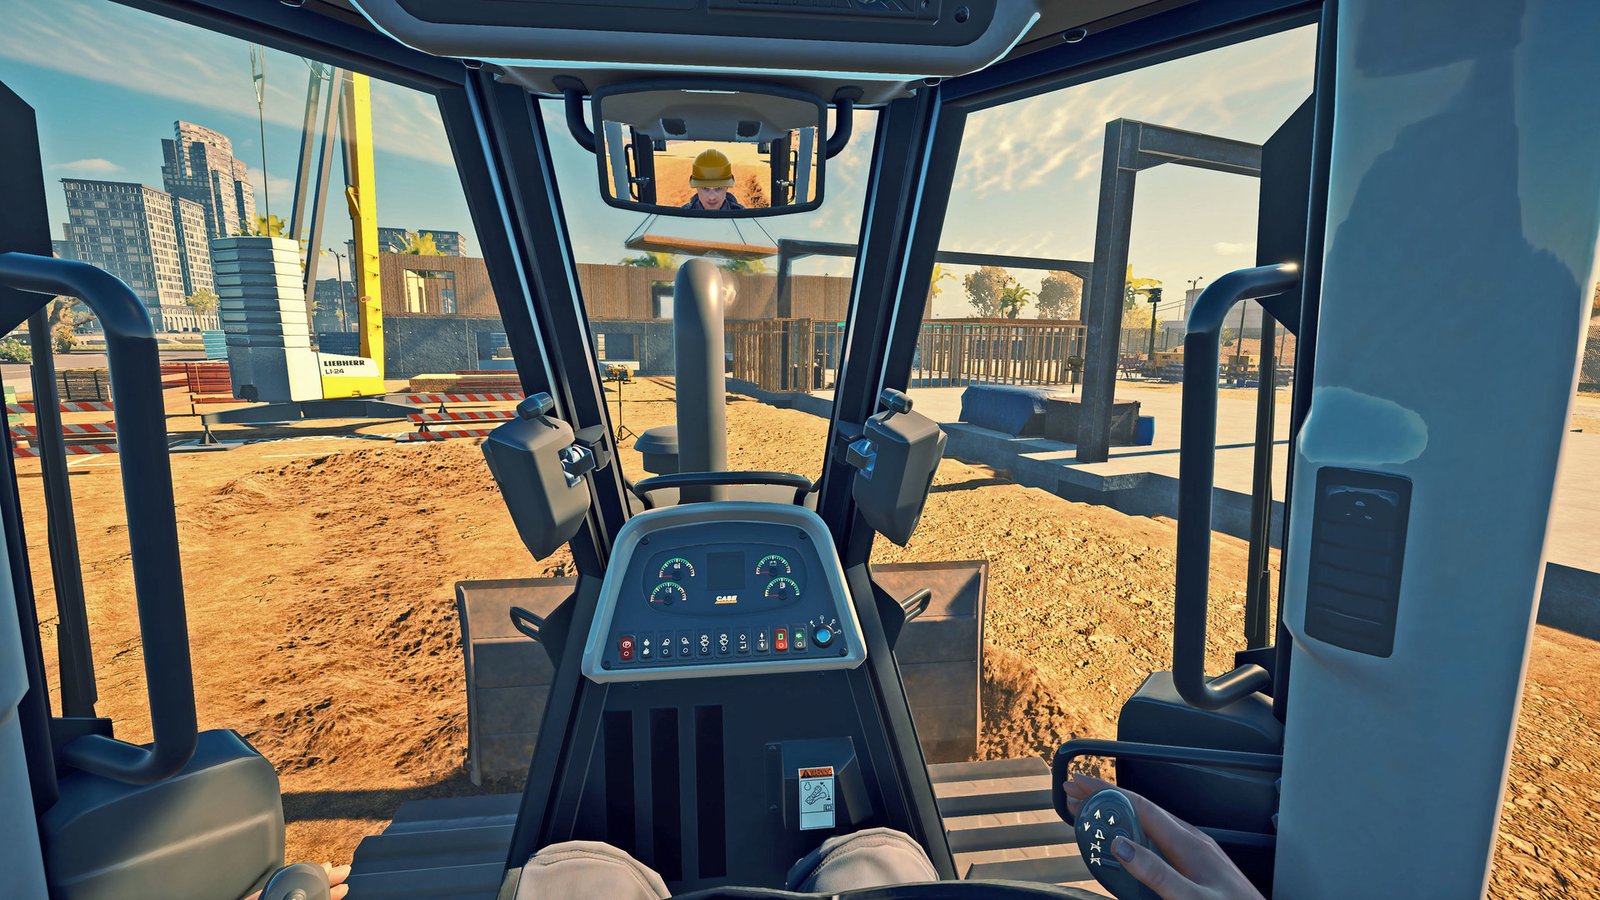 Construction Simulator | Extended Edition (PC) - Steam Key - GLOBAL 